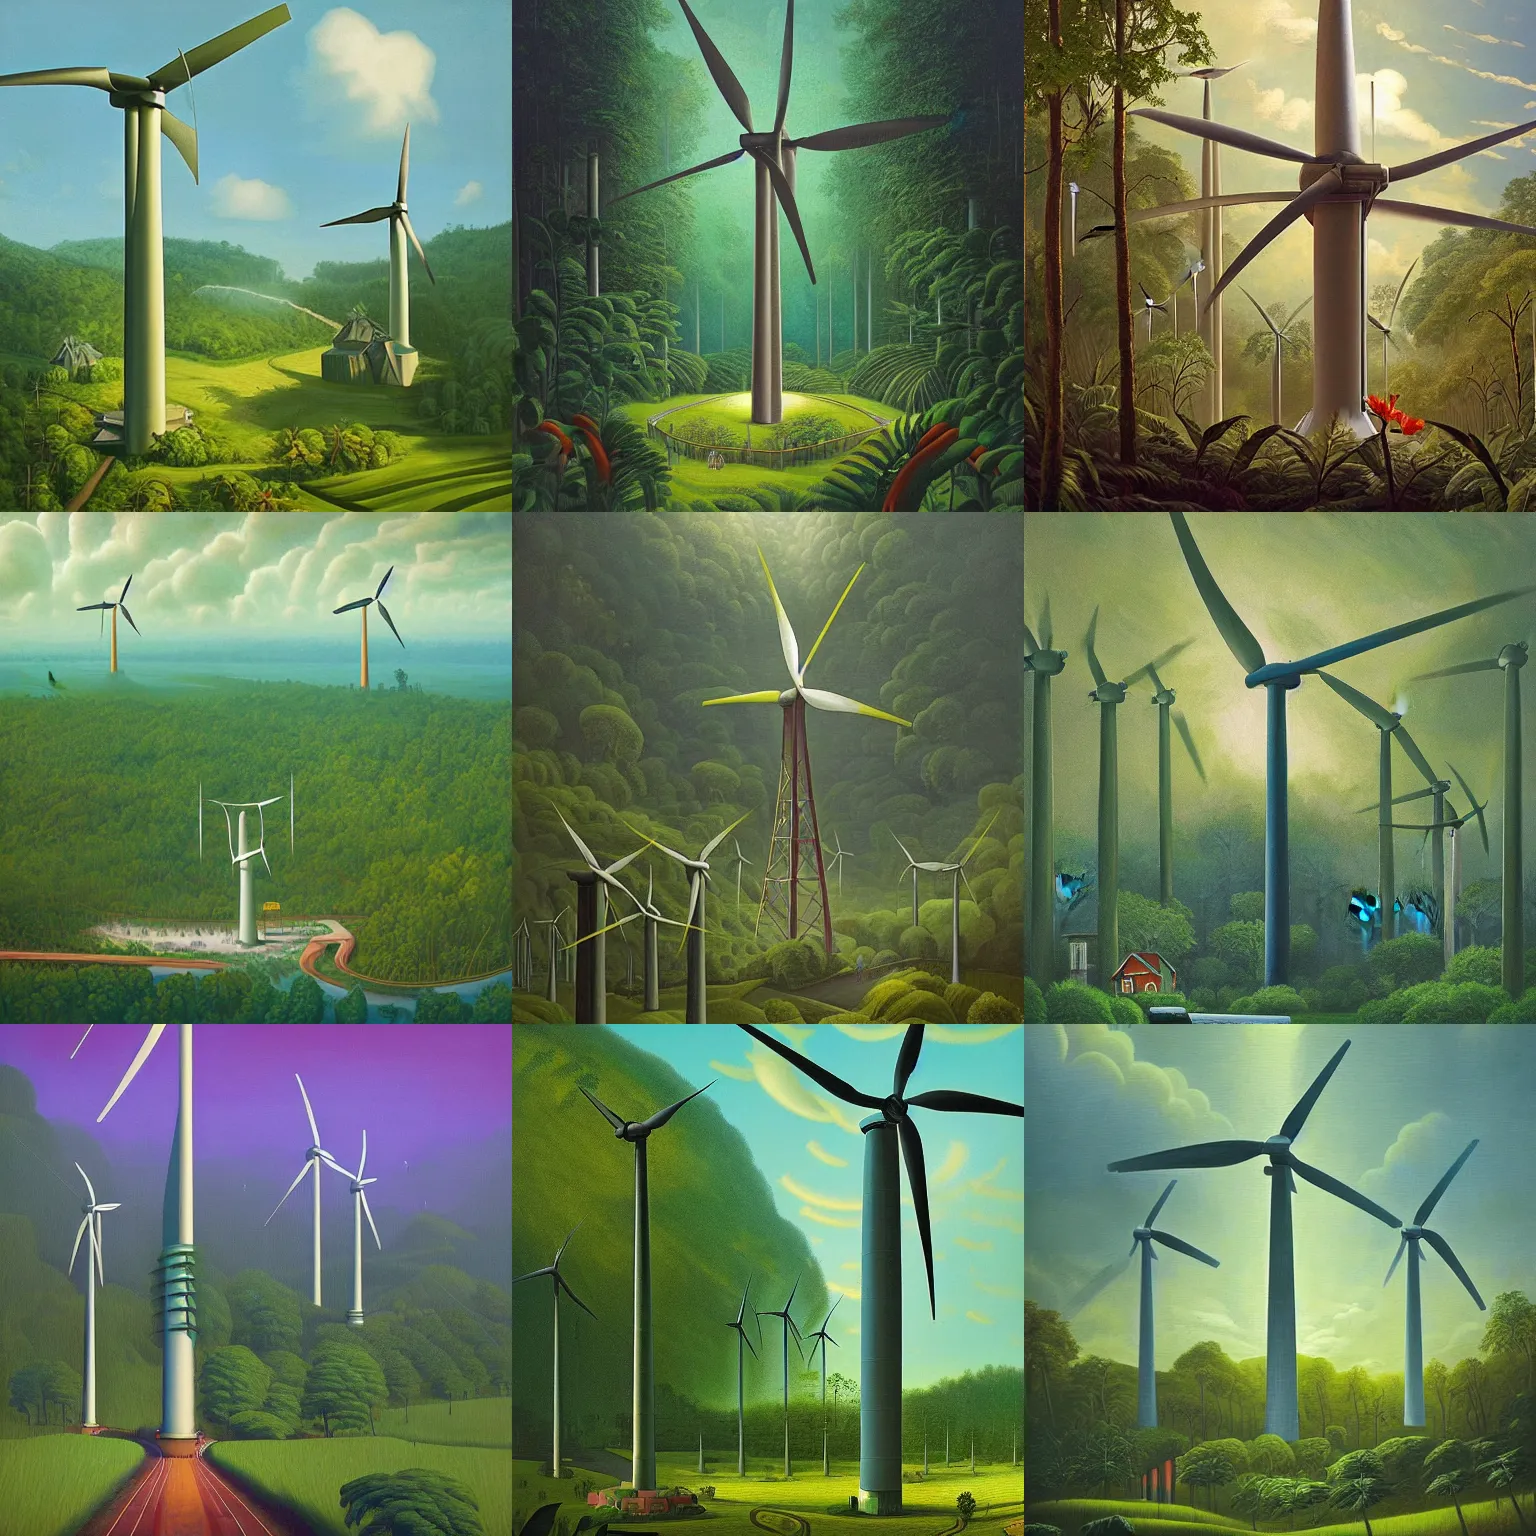 Prompt: A wind turbine power plant in a lush rainforest utopia by Simon Stålenhag and Grant Wood, oil on canvas, heavenly rapture